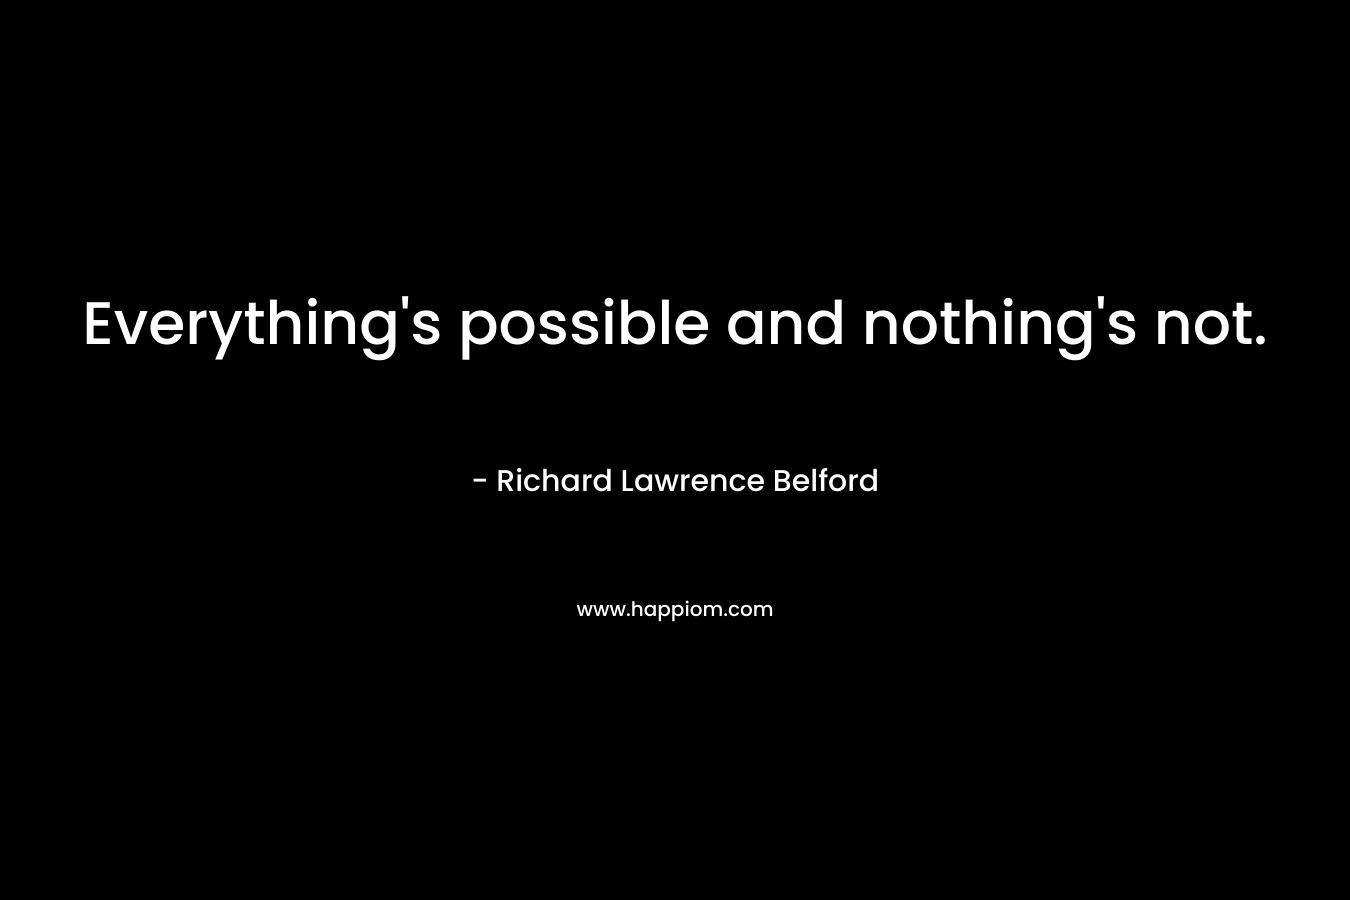 Everything’s possible and nothing’s not. – Richard Lawrence Belford